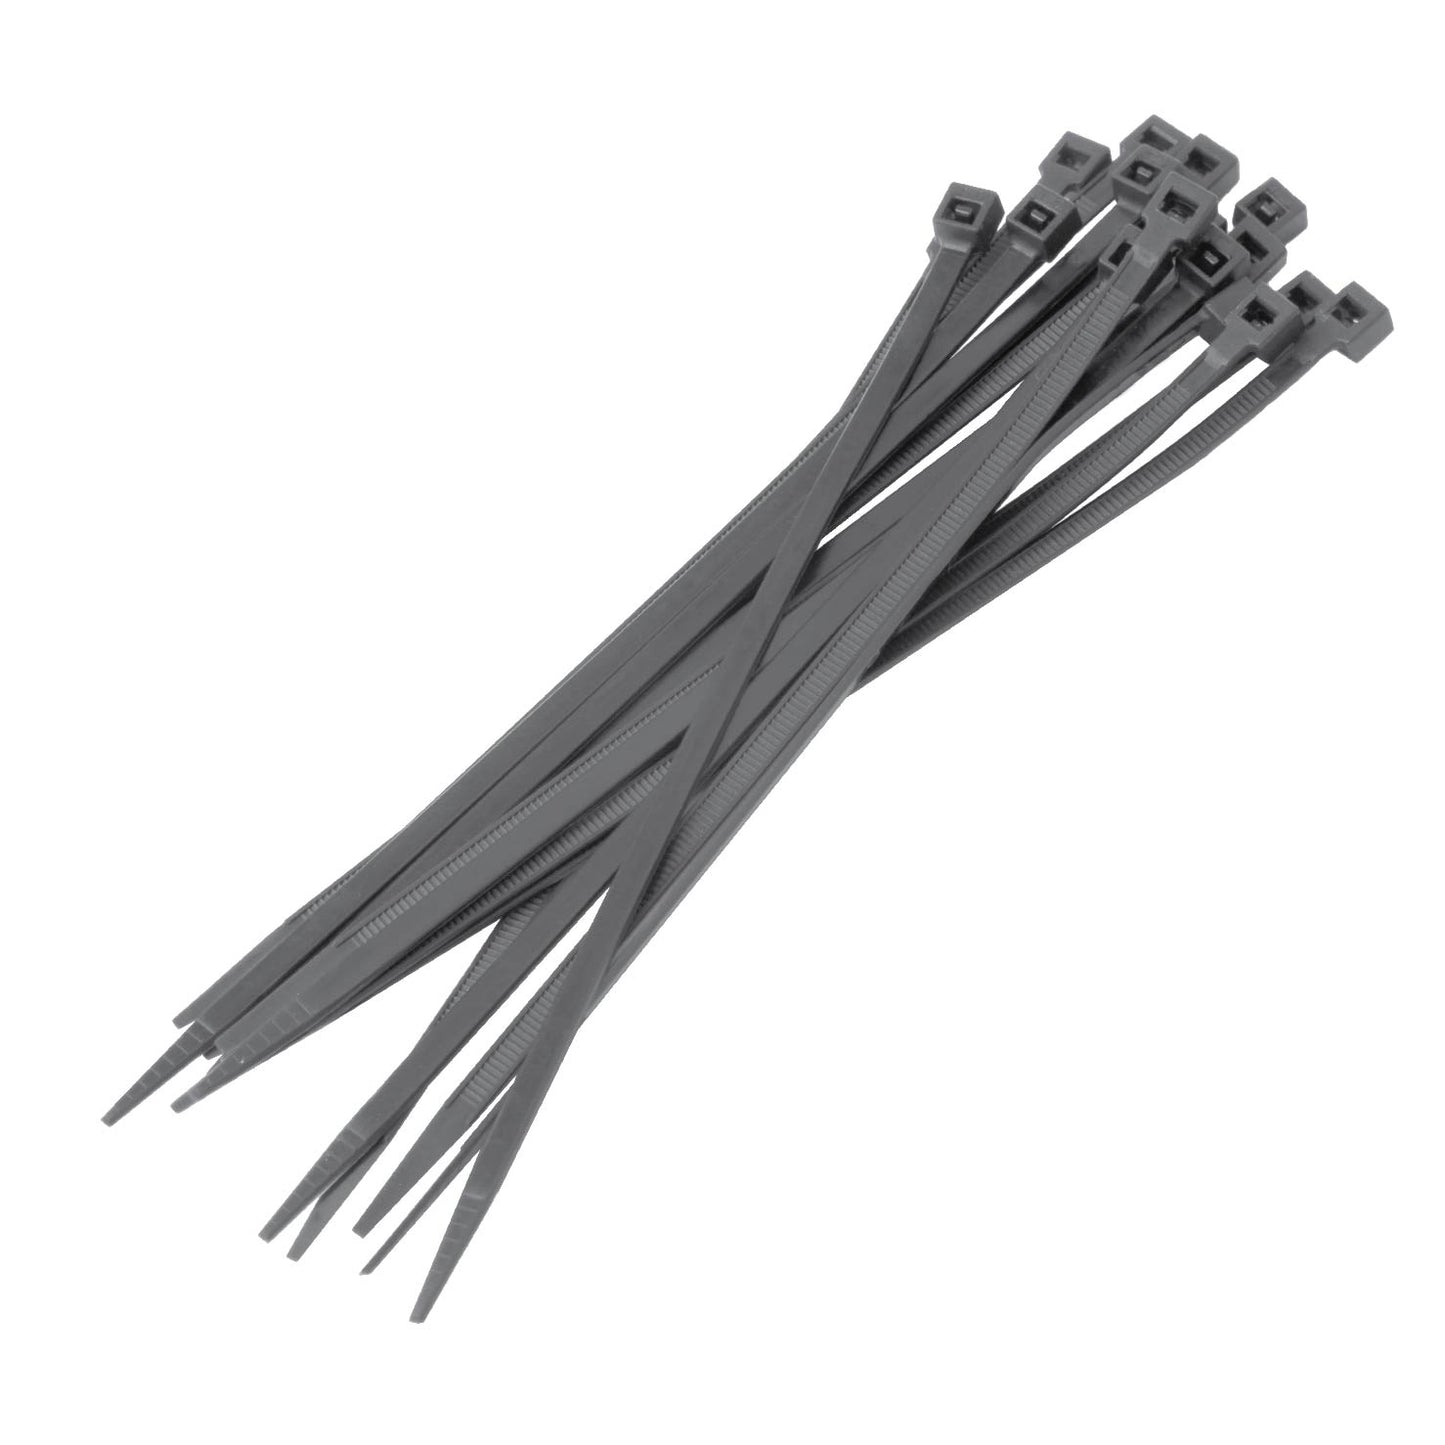 Cable Ties (20 Pack)